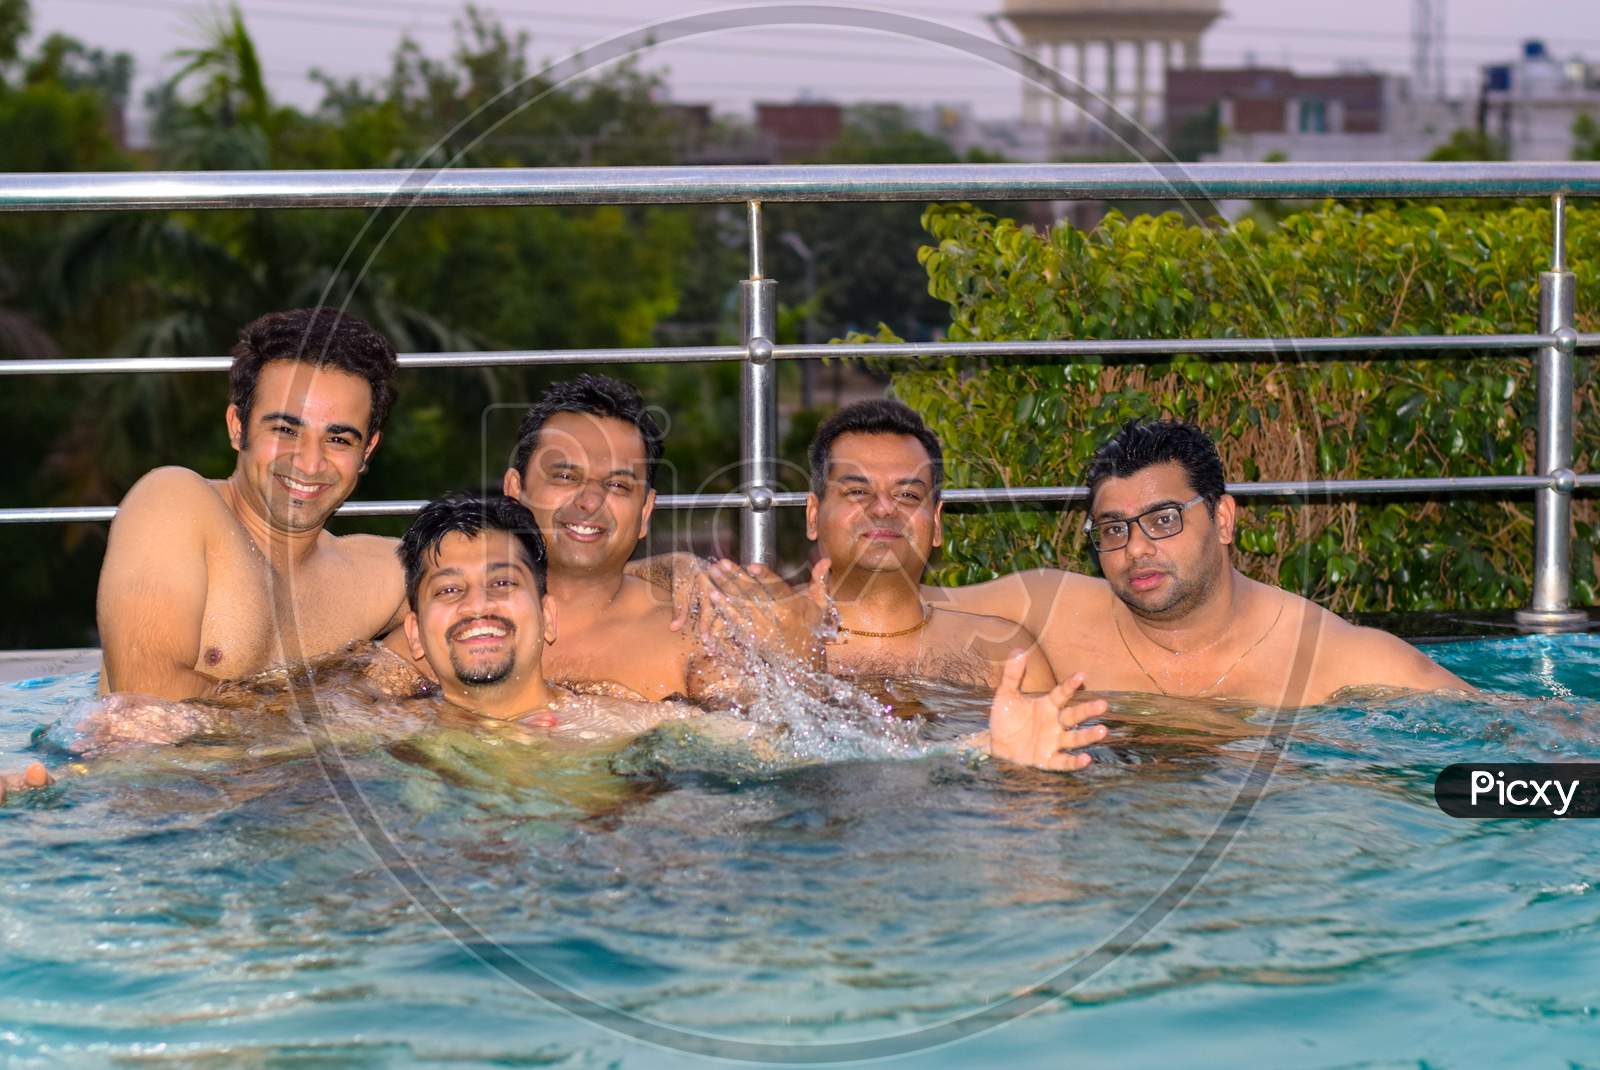 Delhi, 2018 : Group of boys playing and enjoying in swimming pool during summers. The swimming pool is surrounded by steel grill